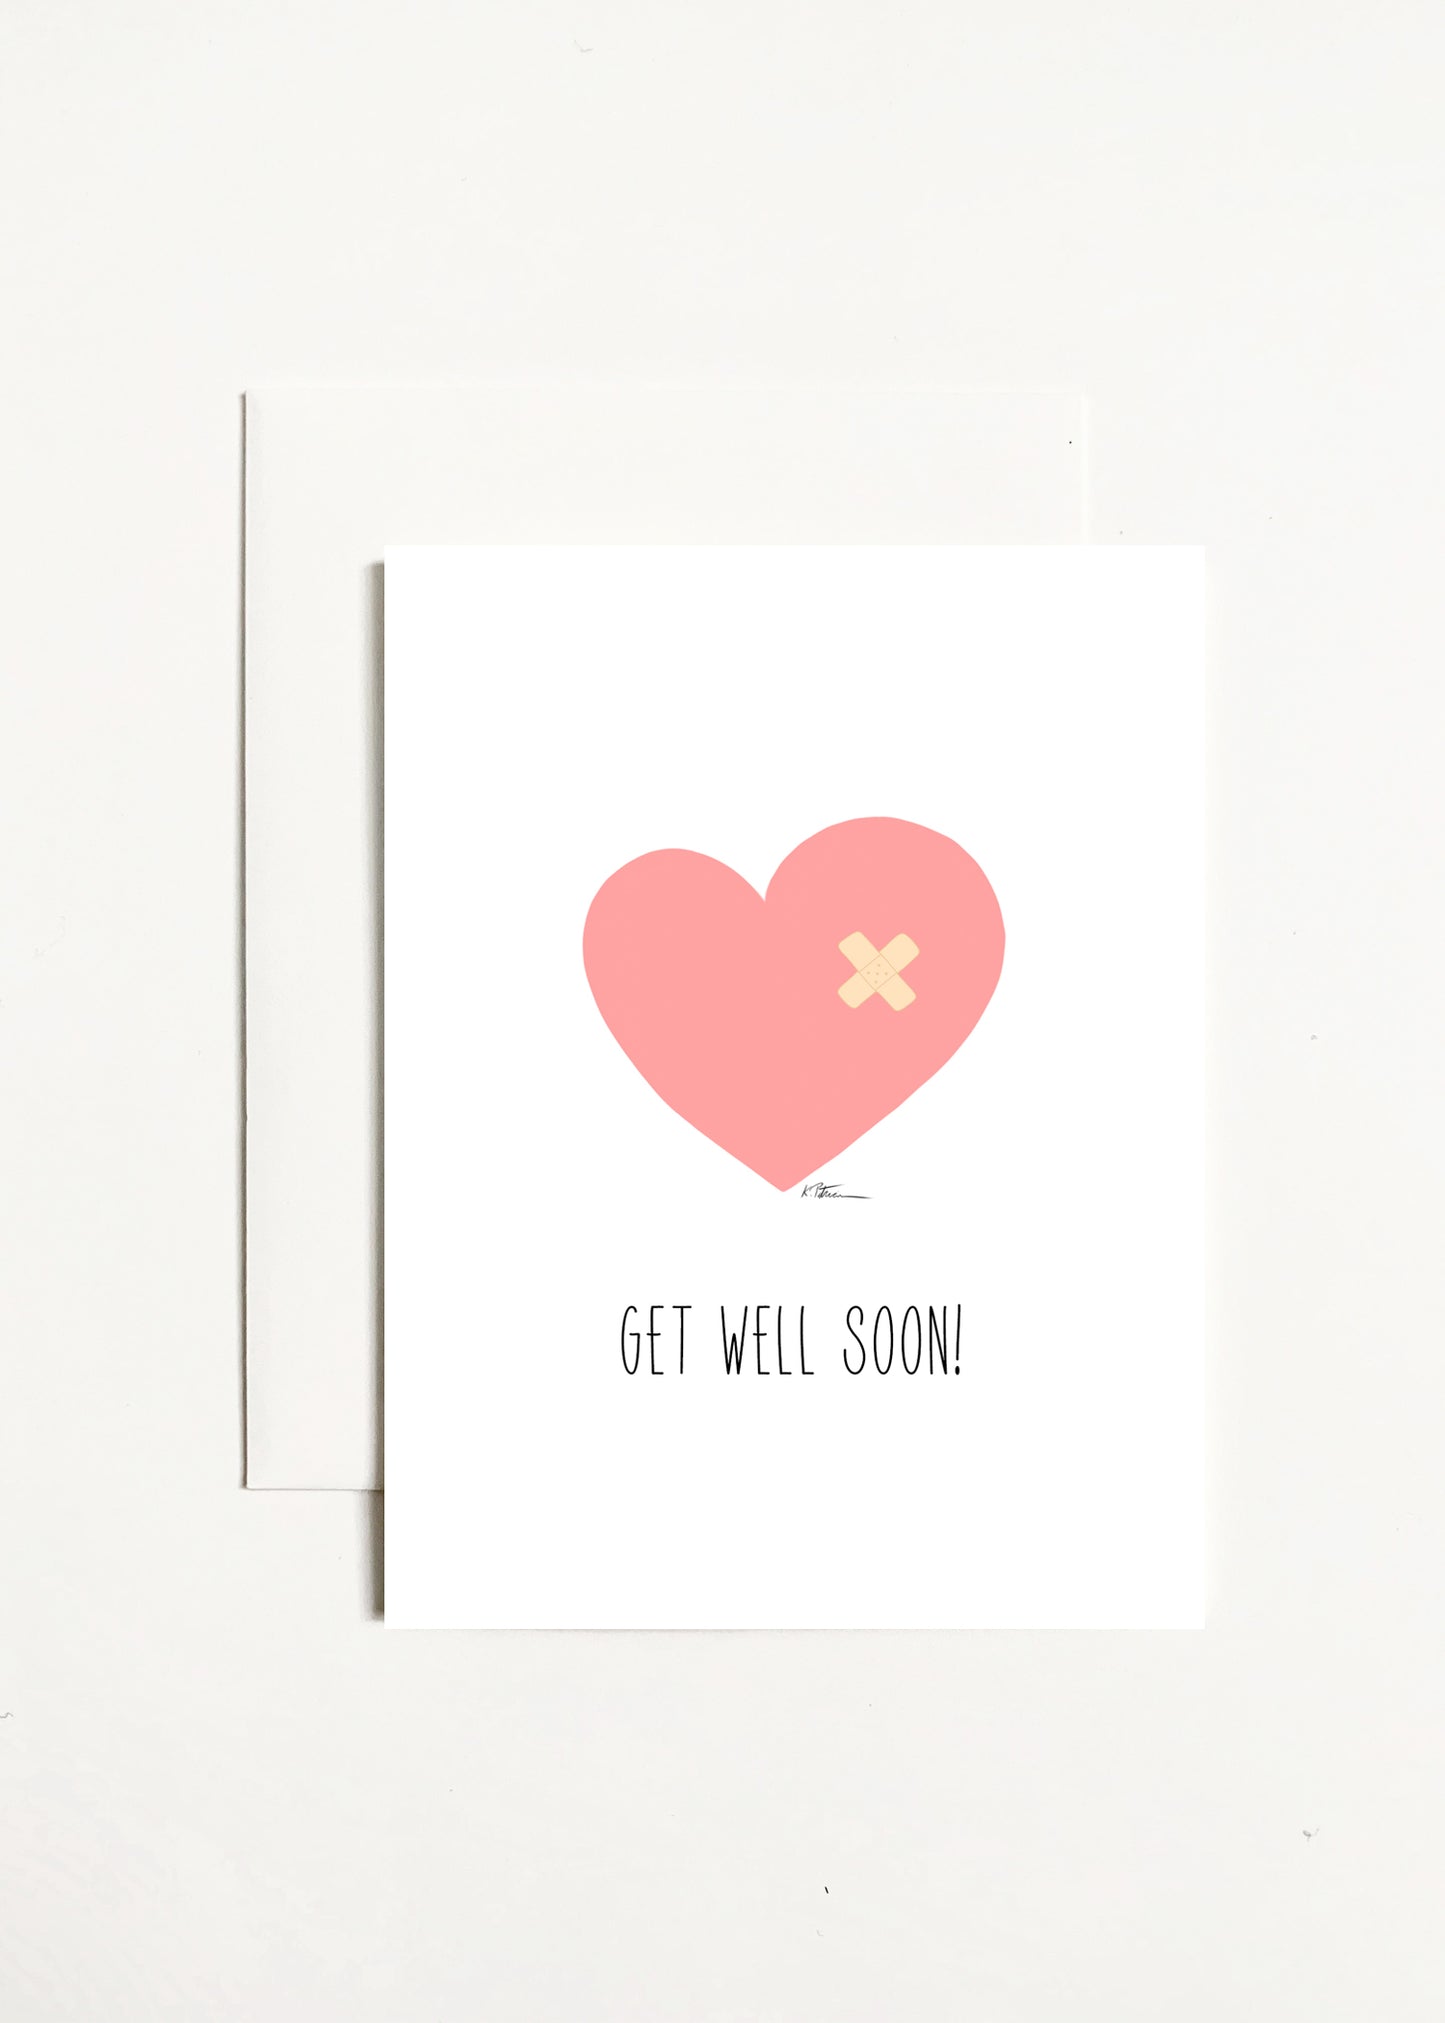 Get Well Soon! - Heart With Band Aid